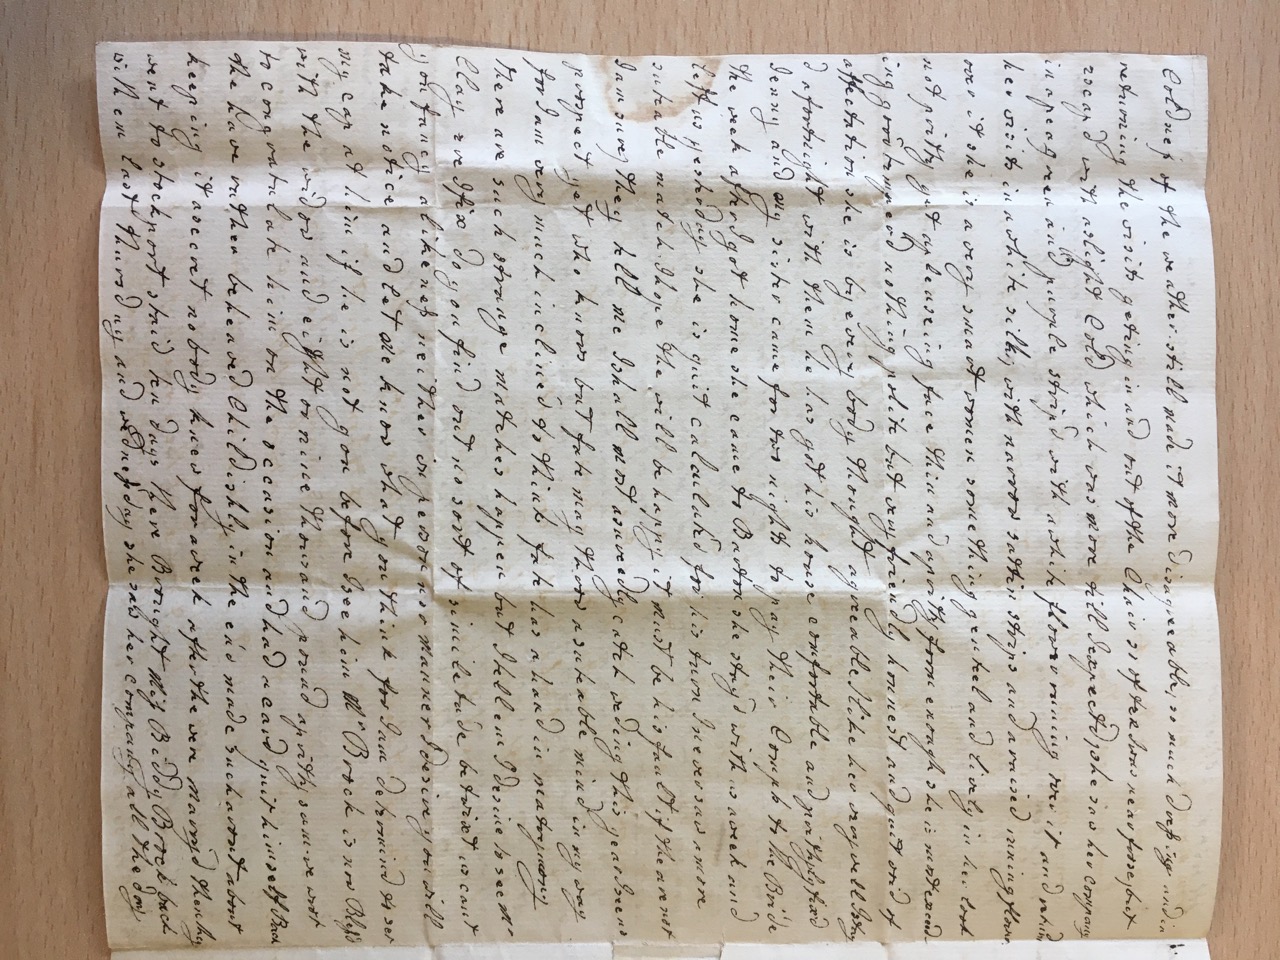 Image #2 of letter: Mary Ann Hesketh to Ann Hare, March